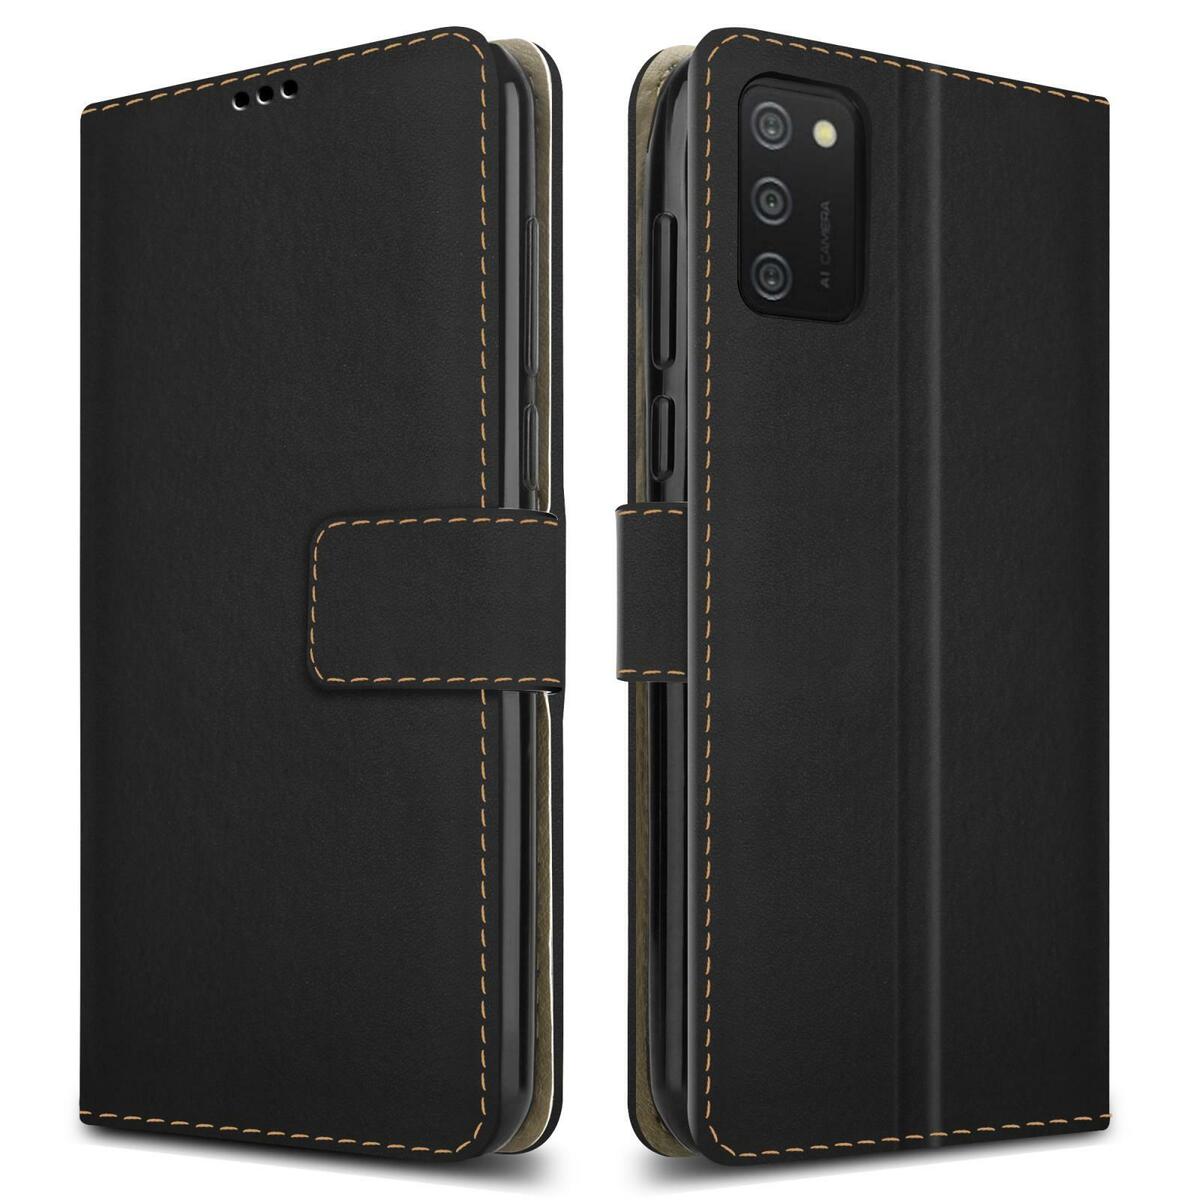 Case / Cover for samsung  A02s saynama